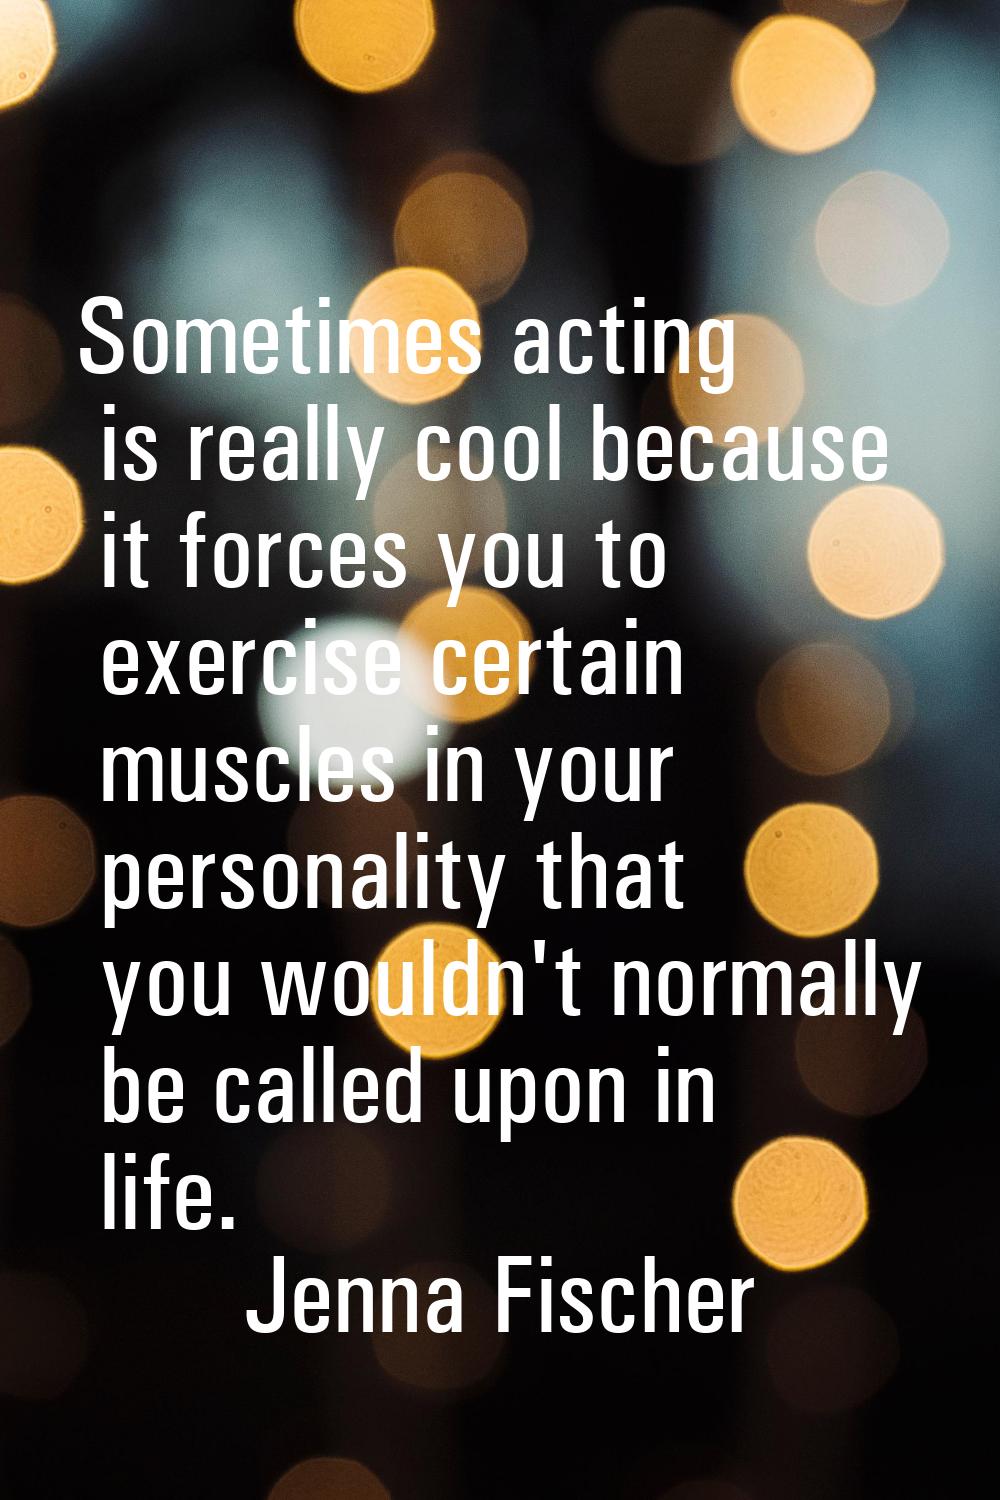 Sometimes acting is really cool because it forces you to exercise certain muscles in your personali